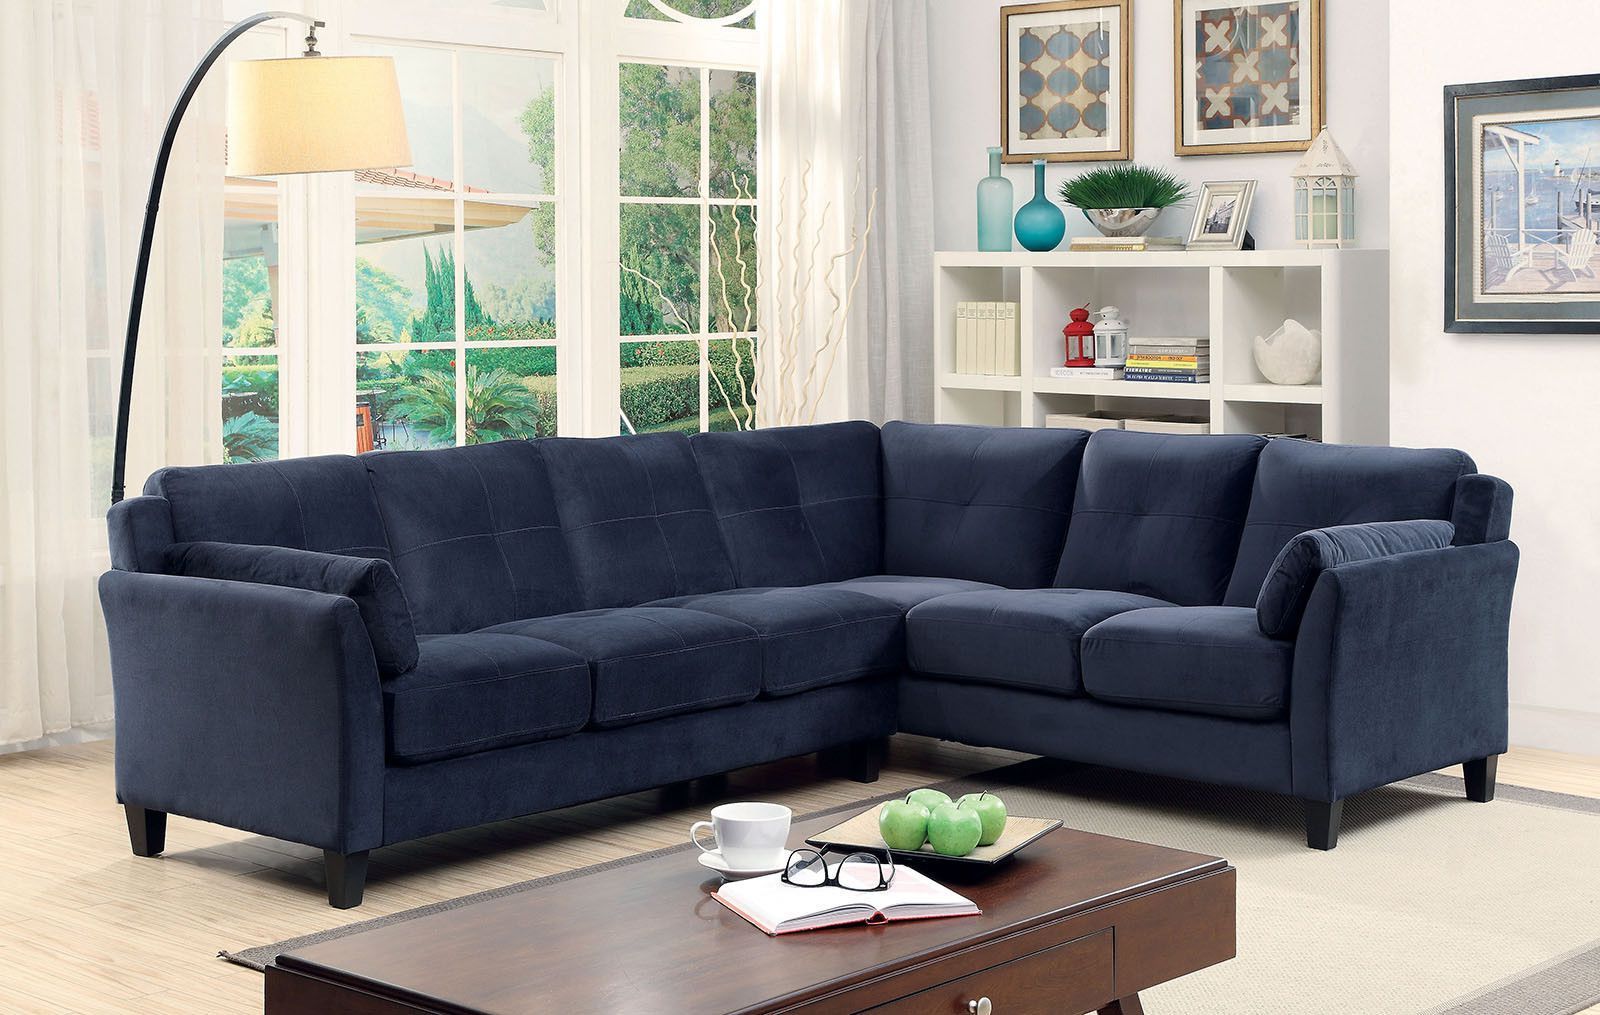 Trendy Peever Ii Navy Sectional Sofa – Cm6368nv (View 8 of 15)